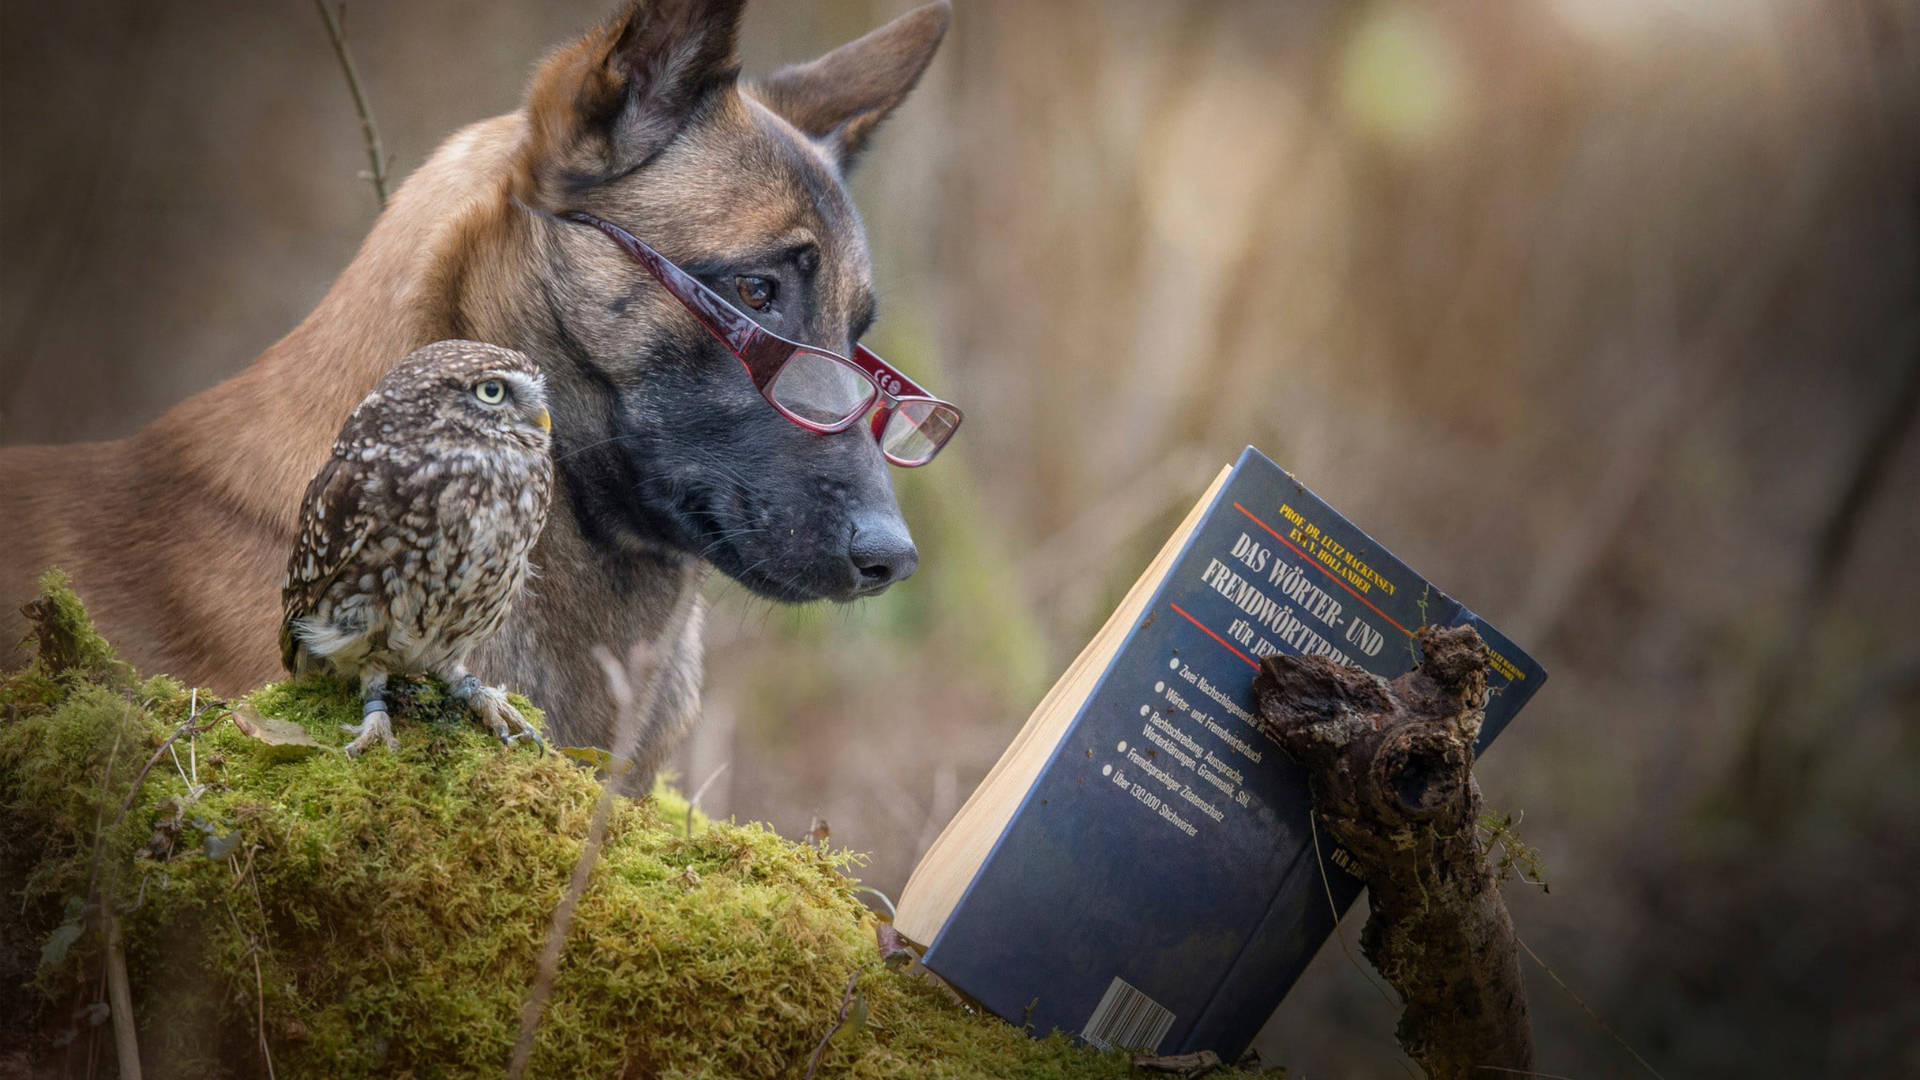 Dog And Owl Reading Book Wallpaper